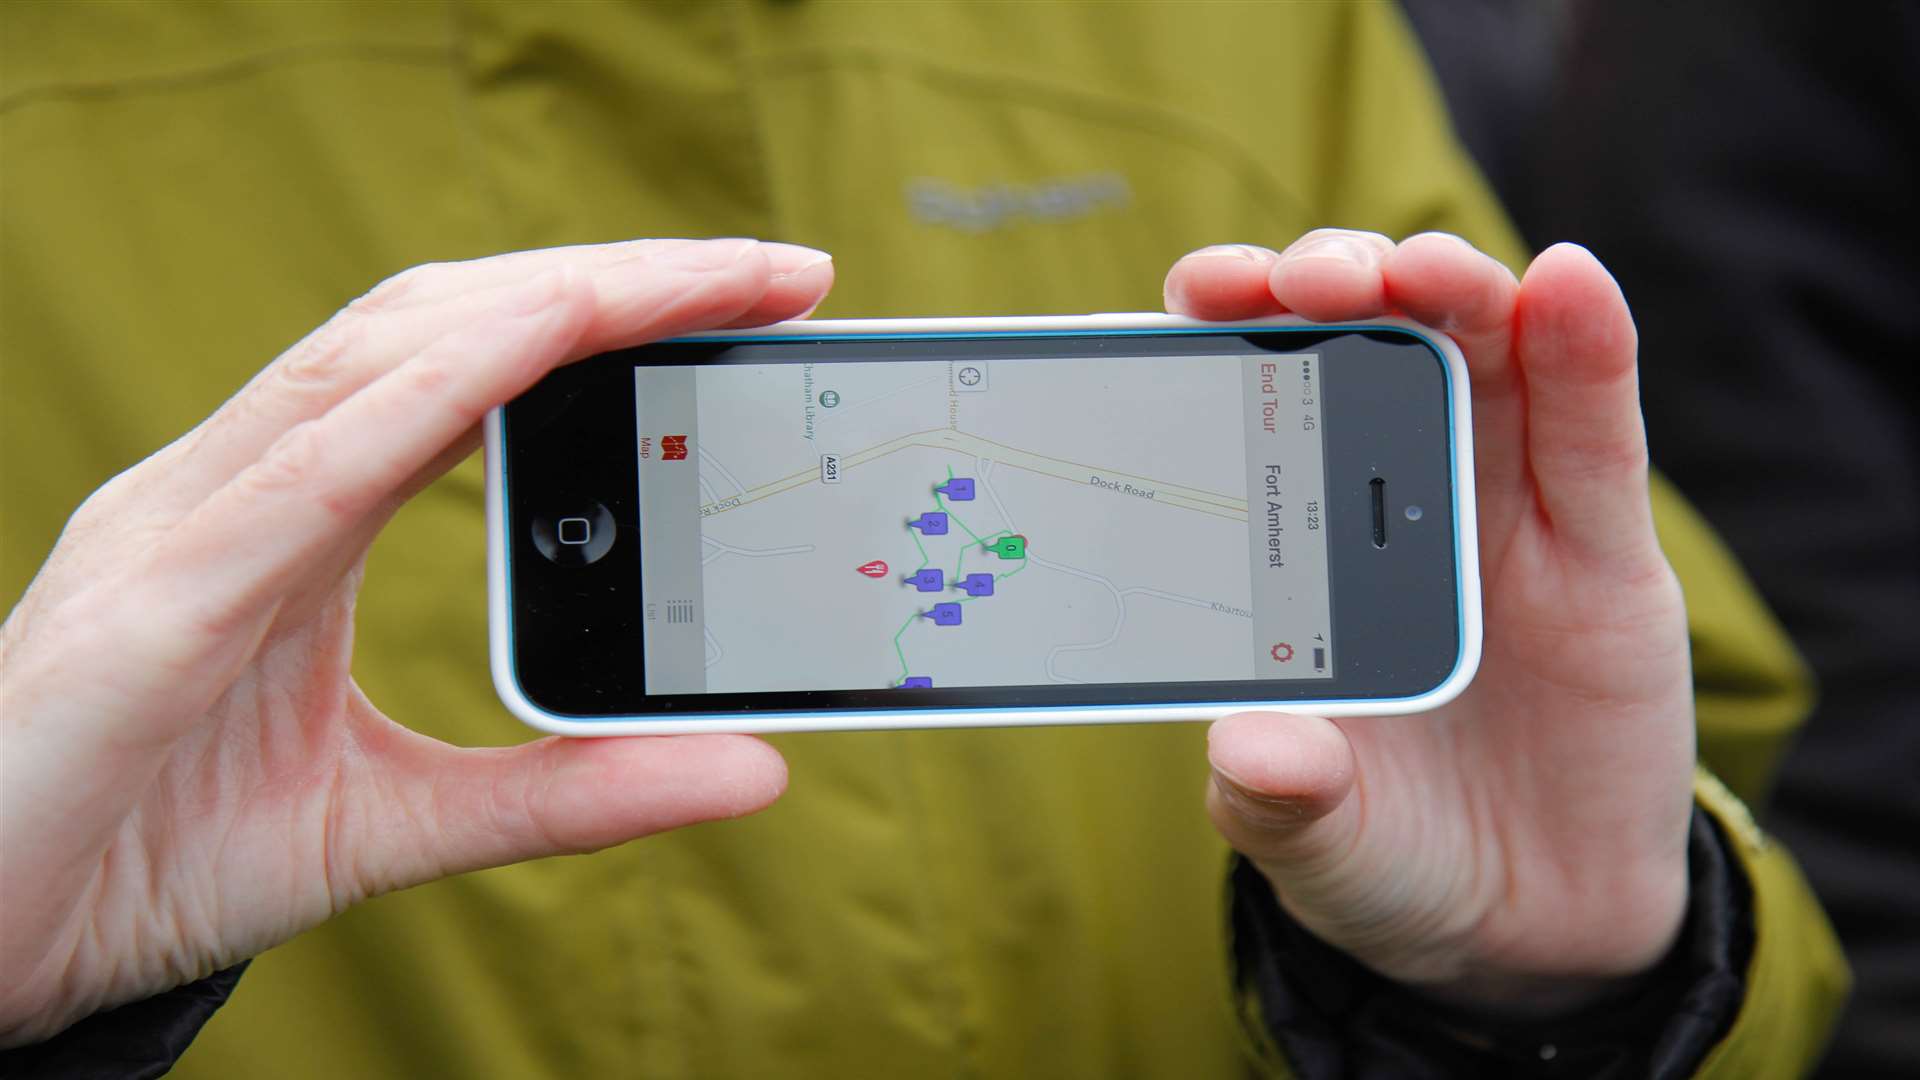 The new tourist app takes visitors on an audio tour of the site. Picture: Darren Small